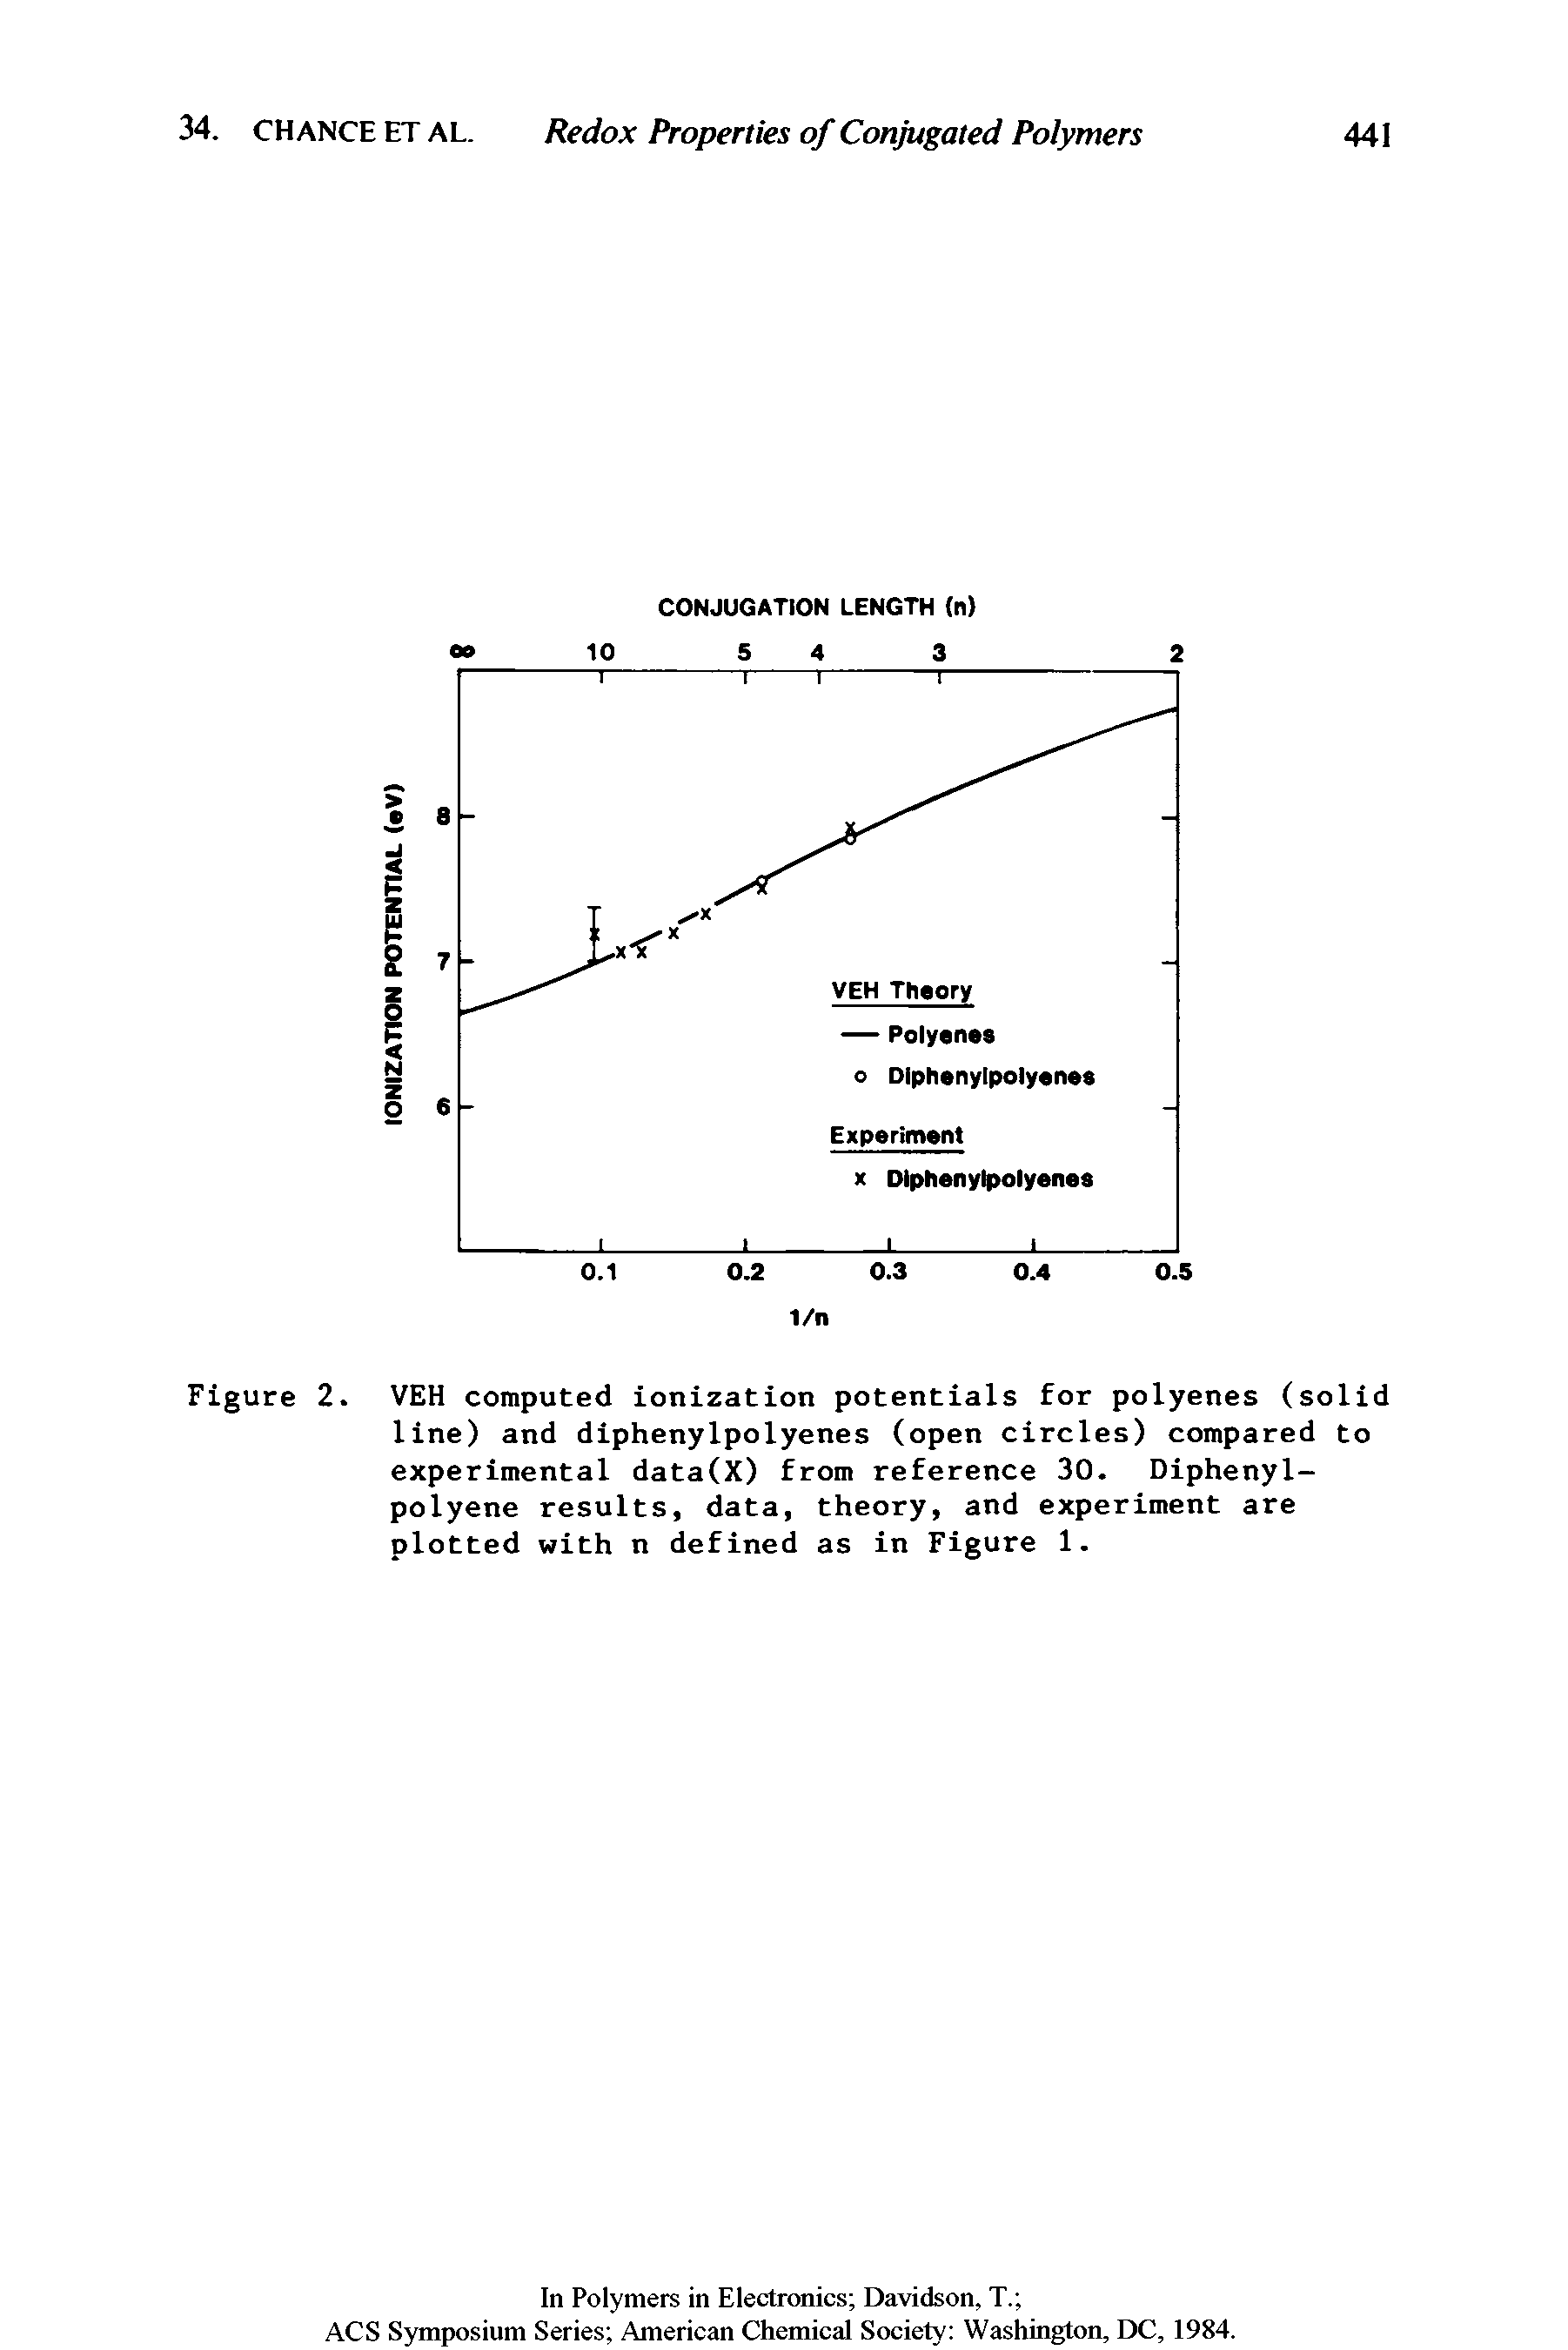 Figure 2. VEH computed ionization potentials for polyenes (solid line) and diphenylpolyenes (open circles) compared to experimental data(X) from reference 30. Diphenyl-polyene results, data, theory, and experiment are plotted with n defined as in Figure 1.